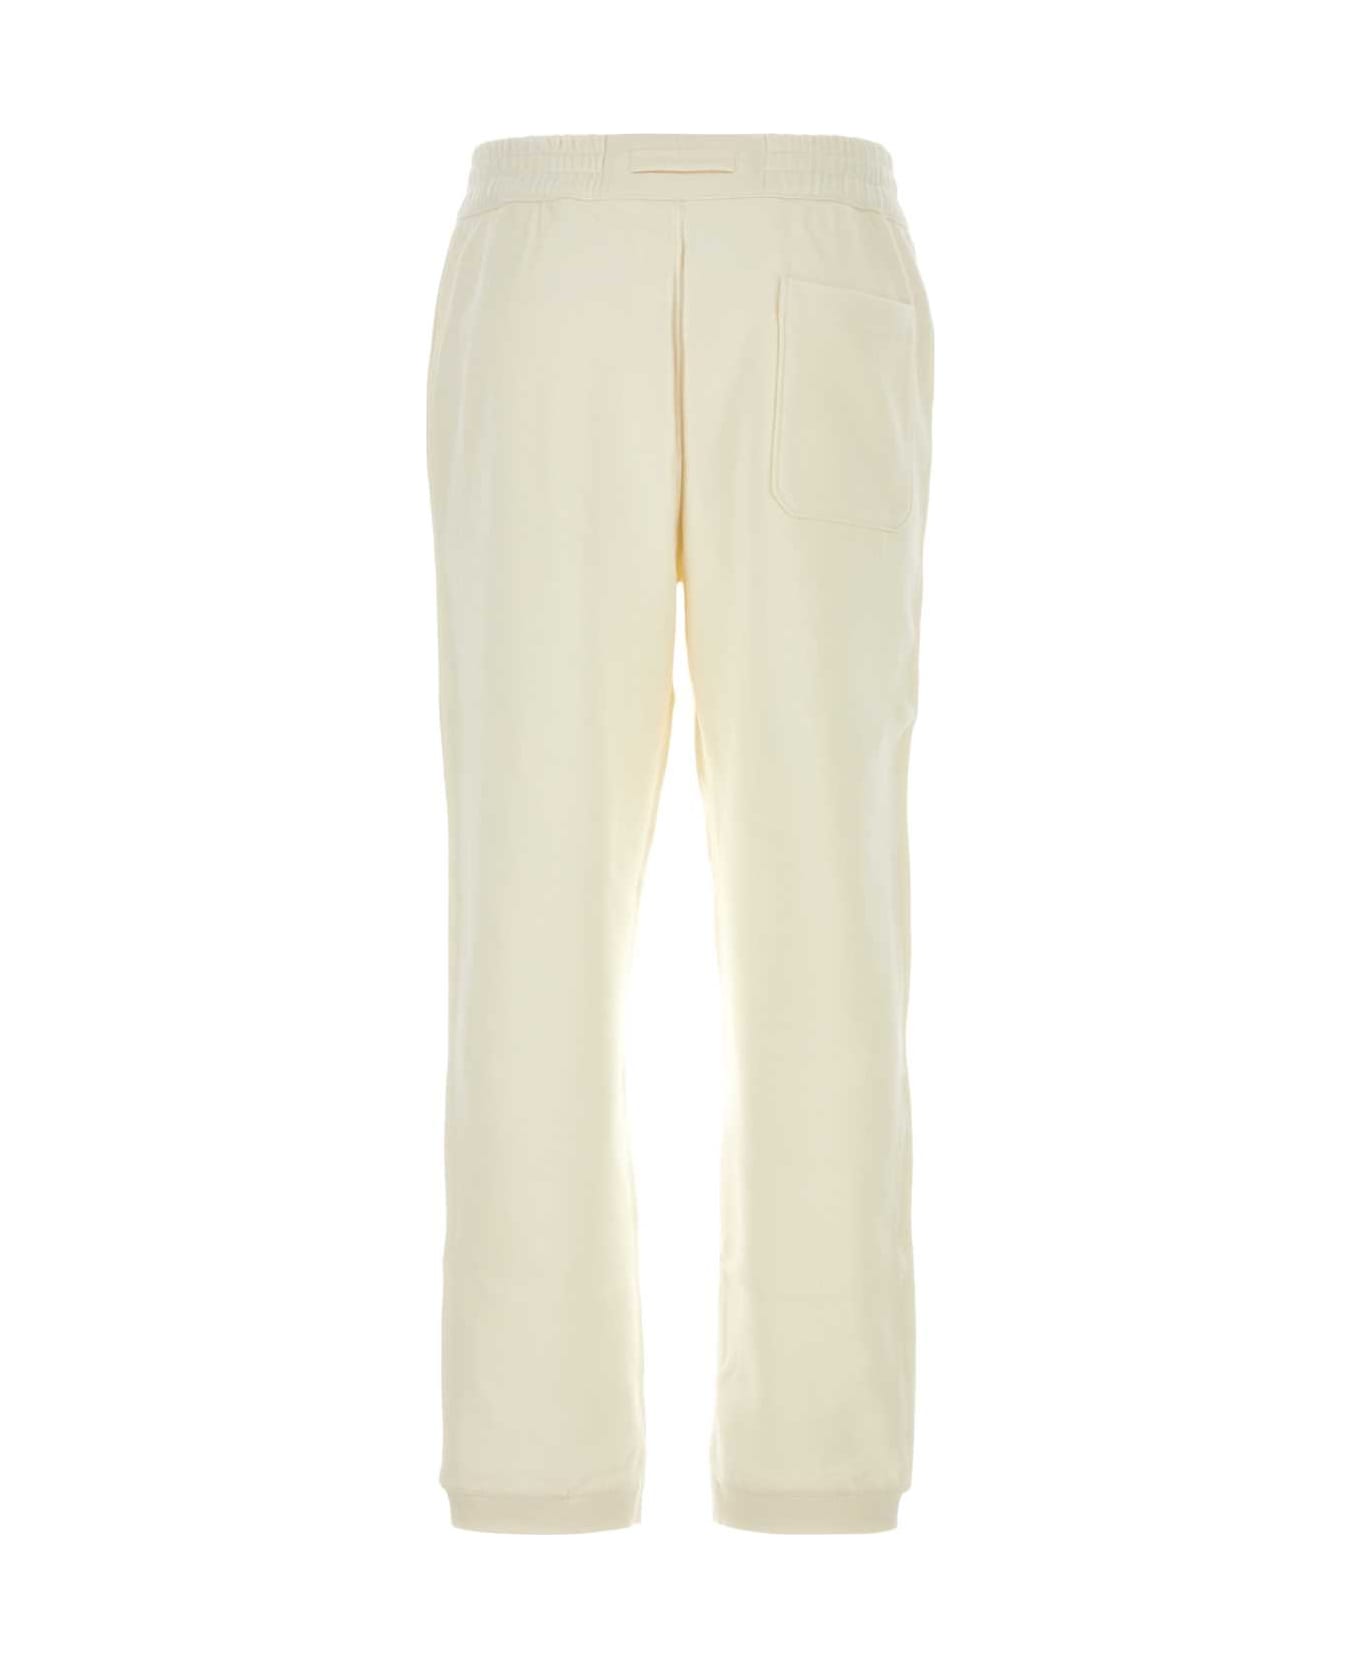 Zegna Ivory Cotton Blend Joggers - N01 ボトムス